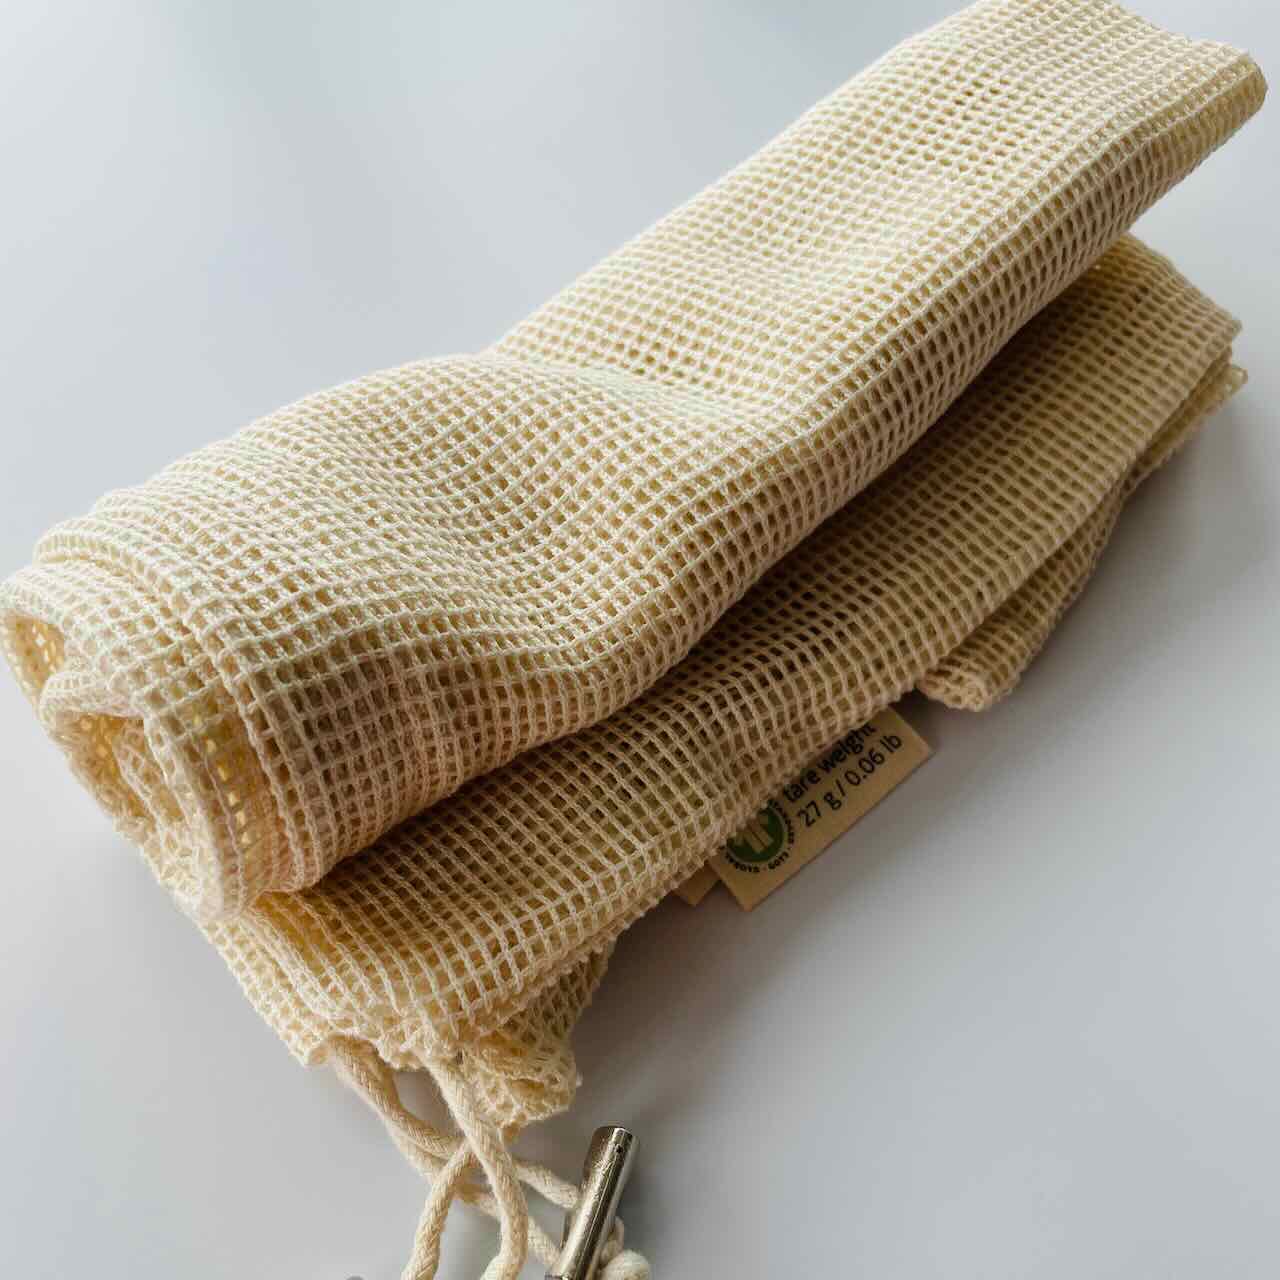 two reusable muslin produce bags folded up on a table top.